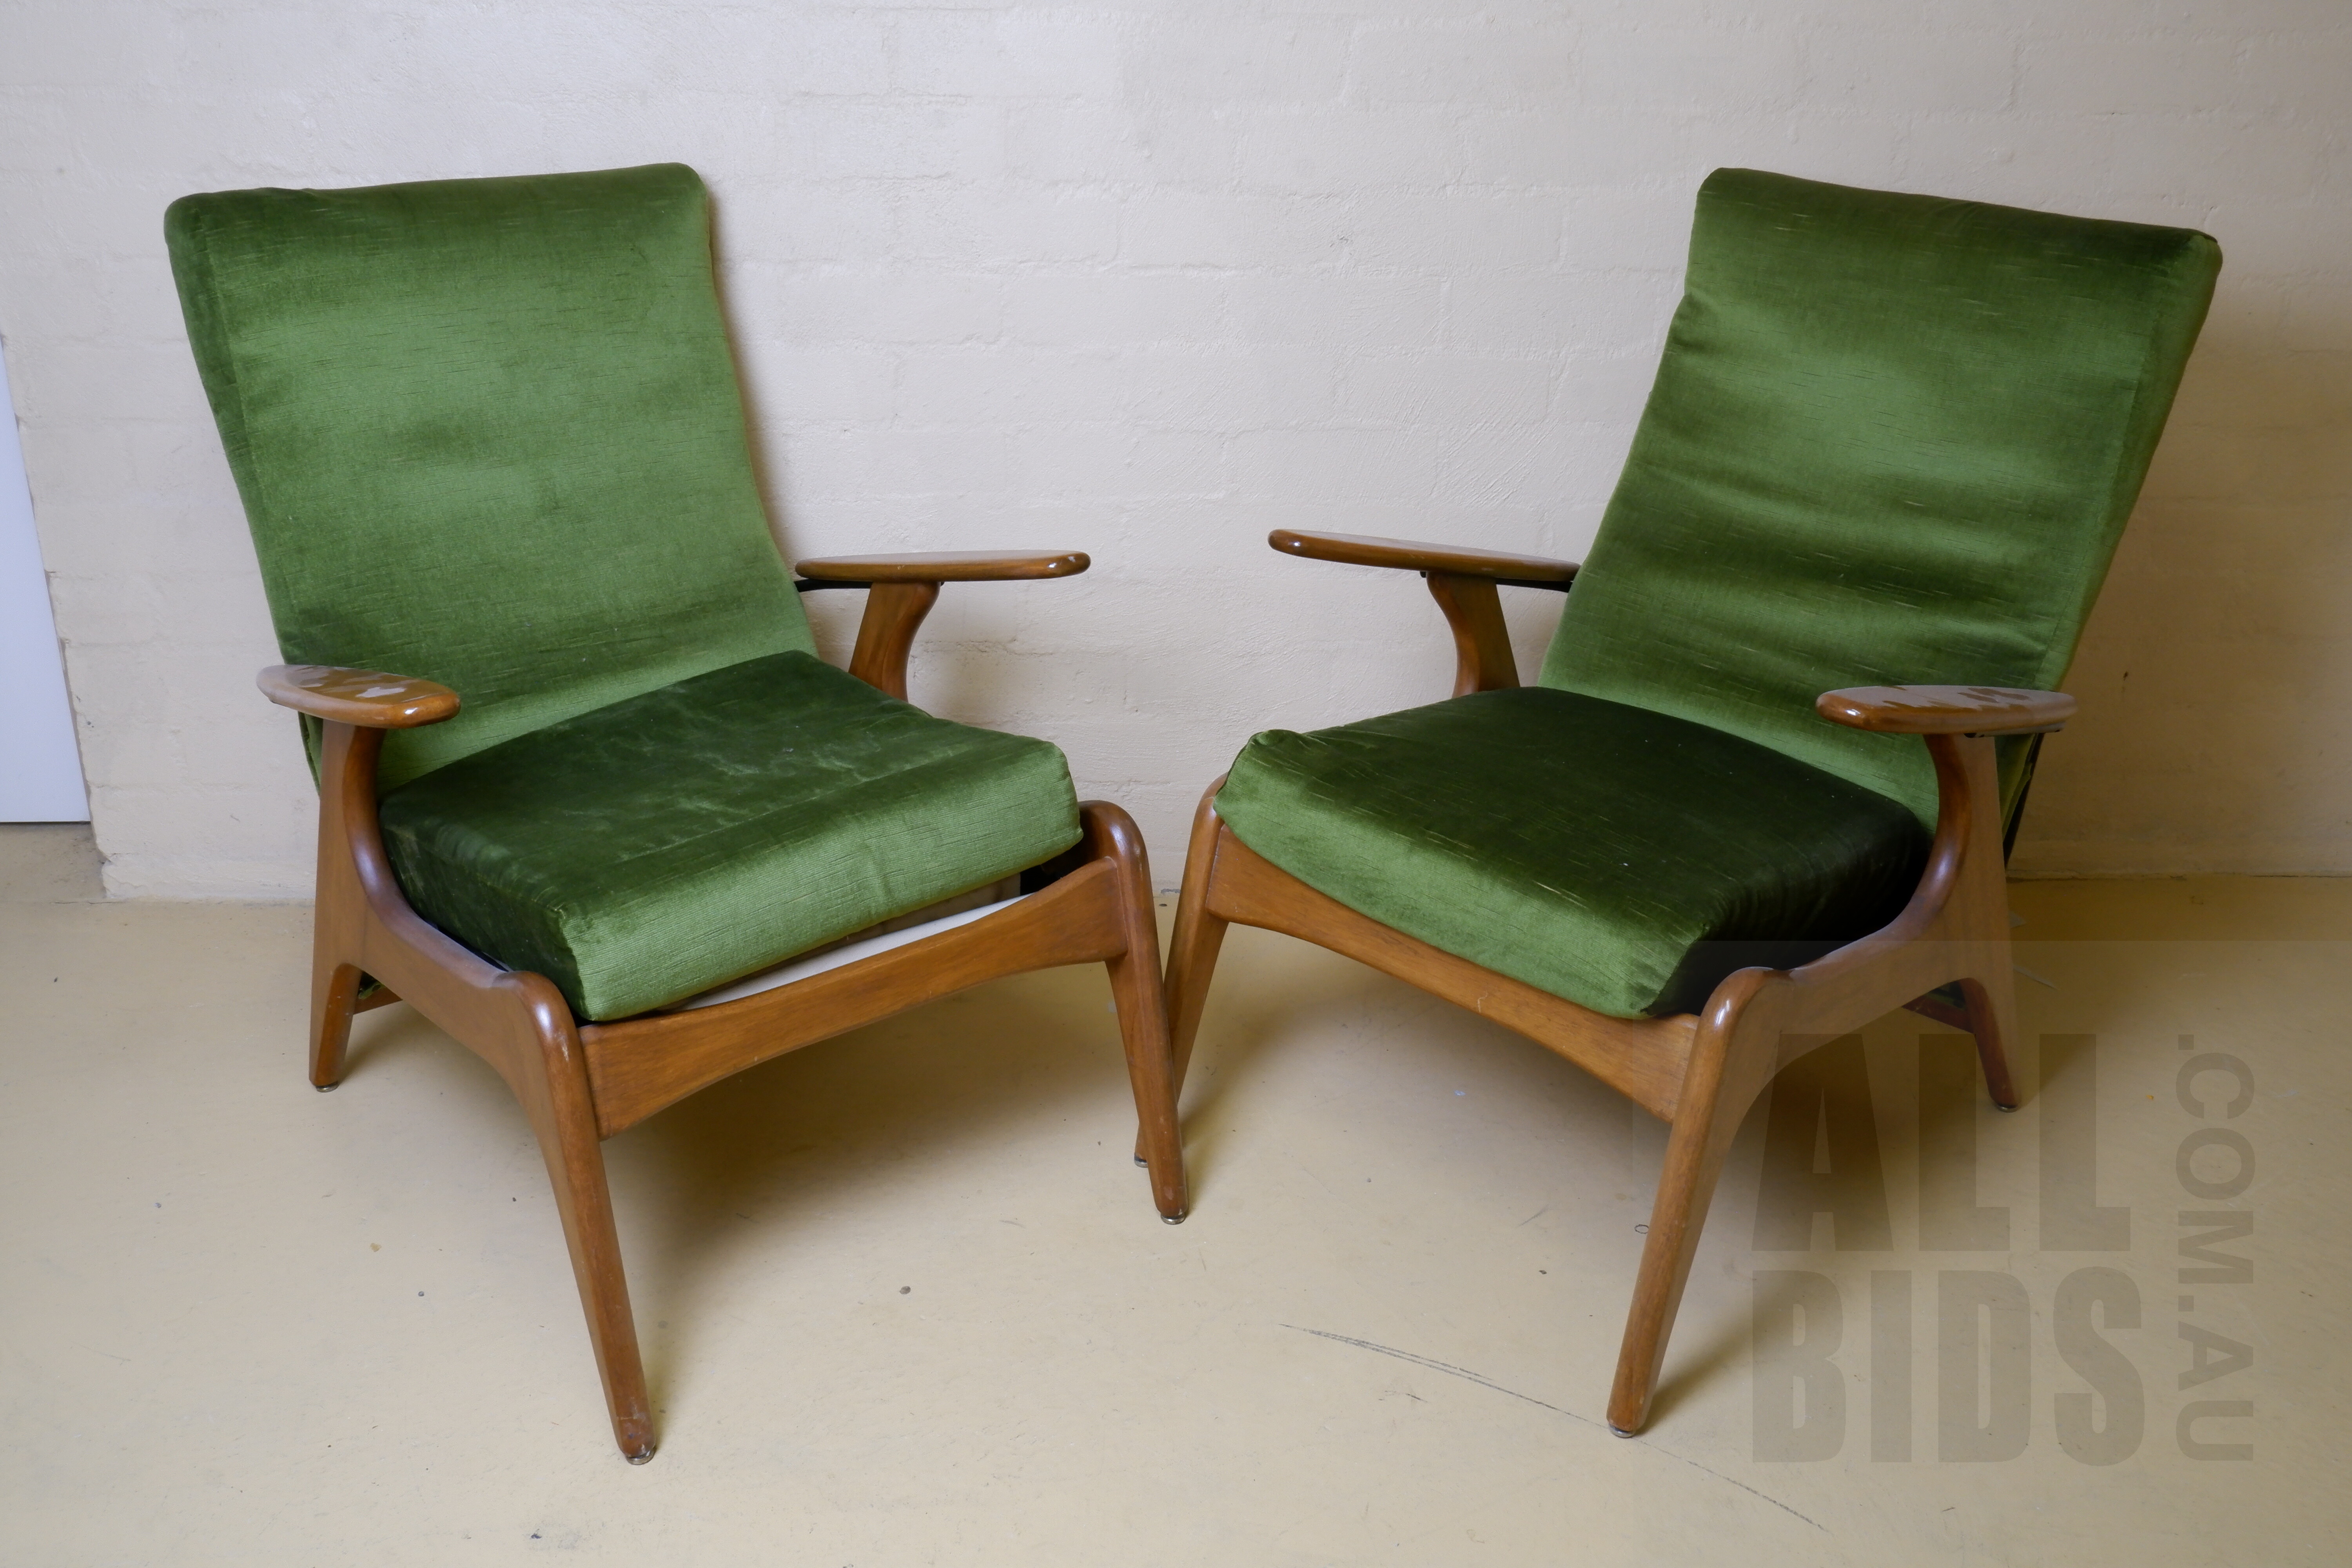 'Pair of Fler Sc55 Style Teak Armchairs with Green Fabric Upholstery'